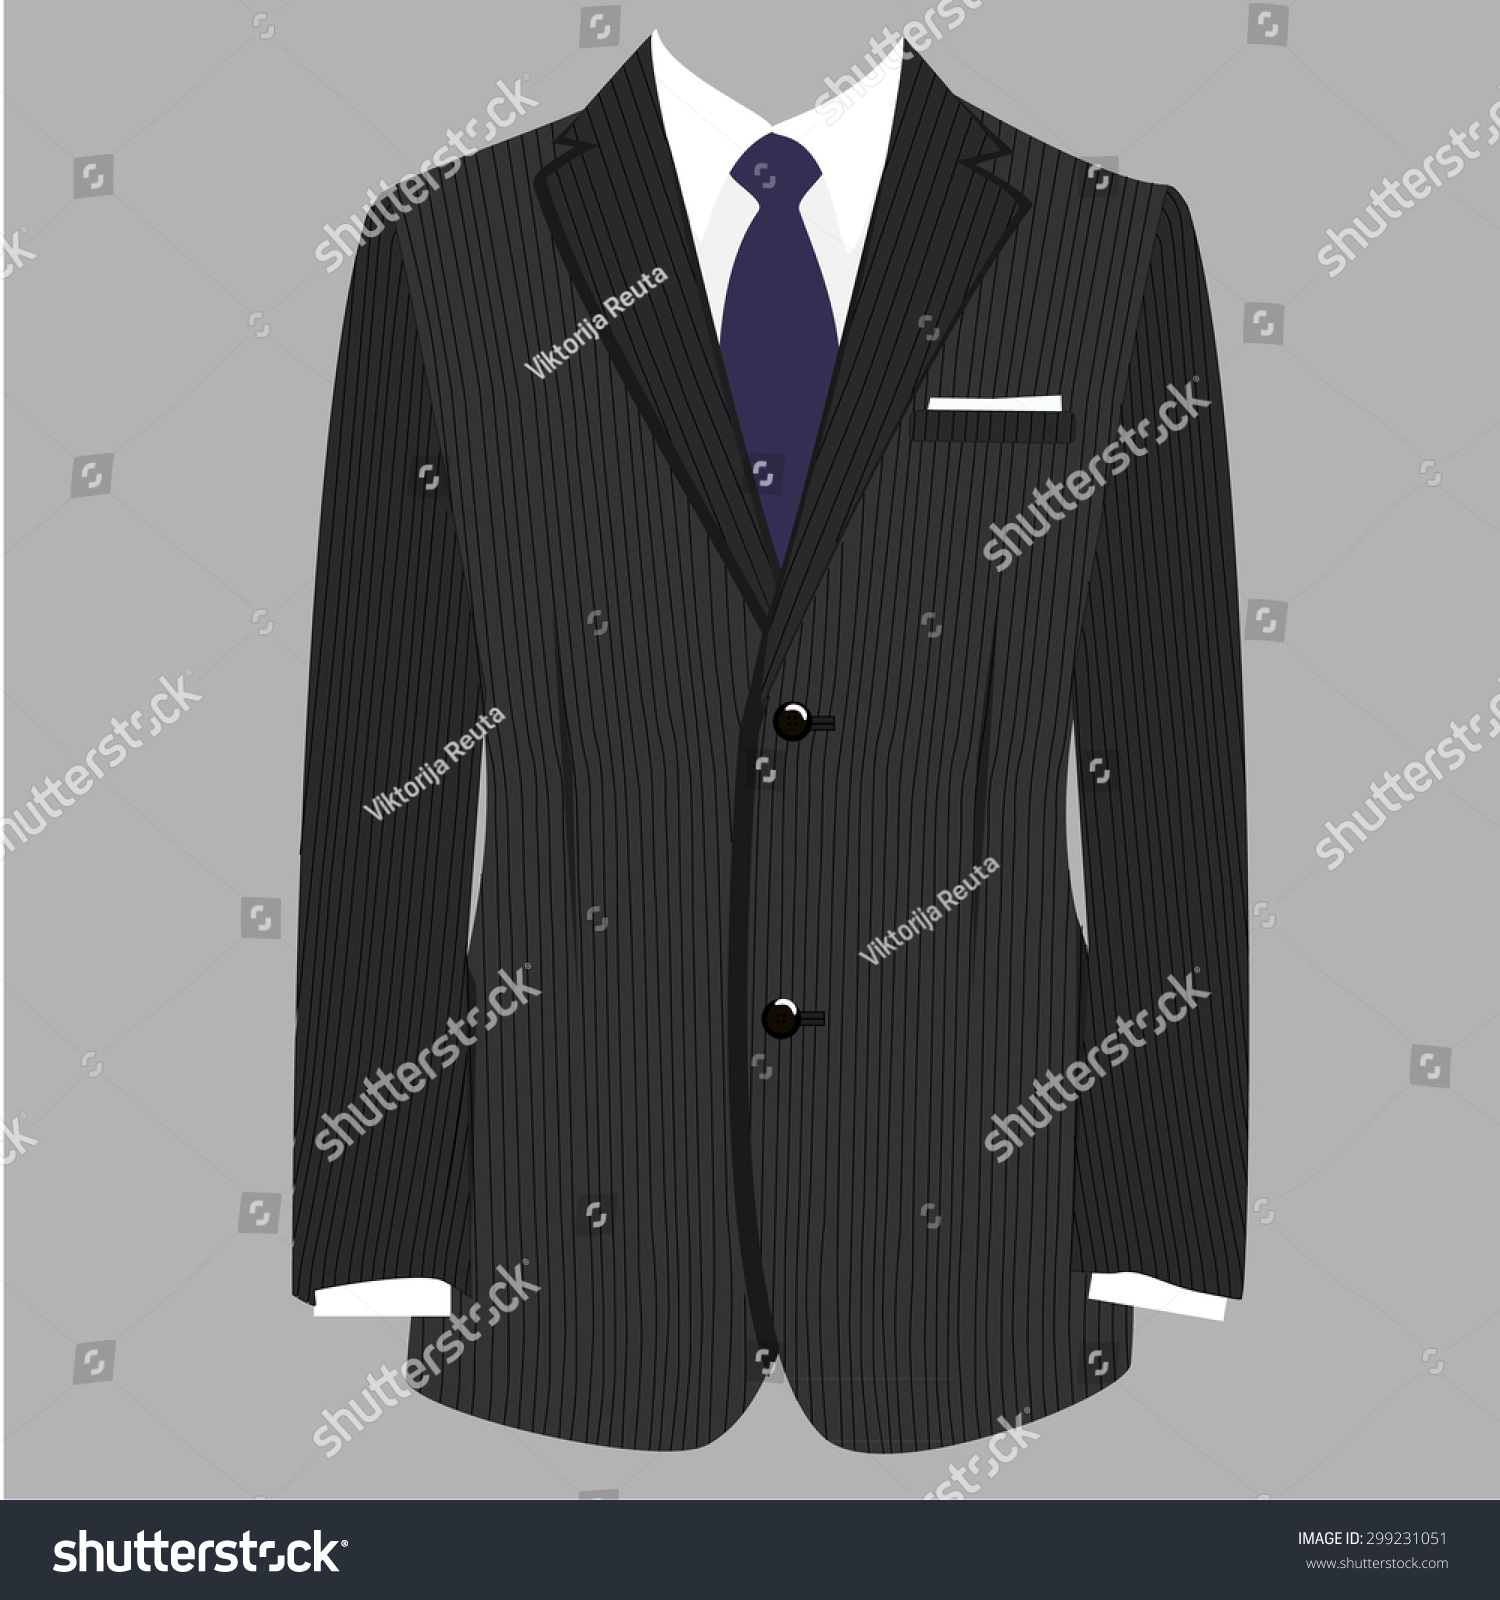 15,451 Business man in striped suit Images, Stock Photos & Vectors ...